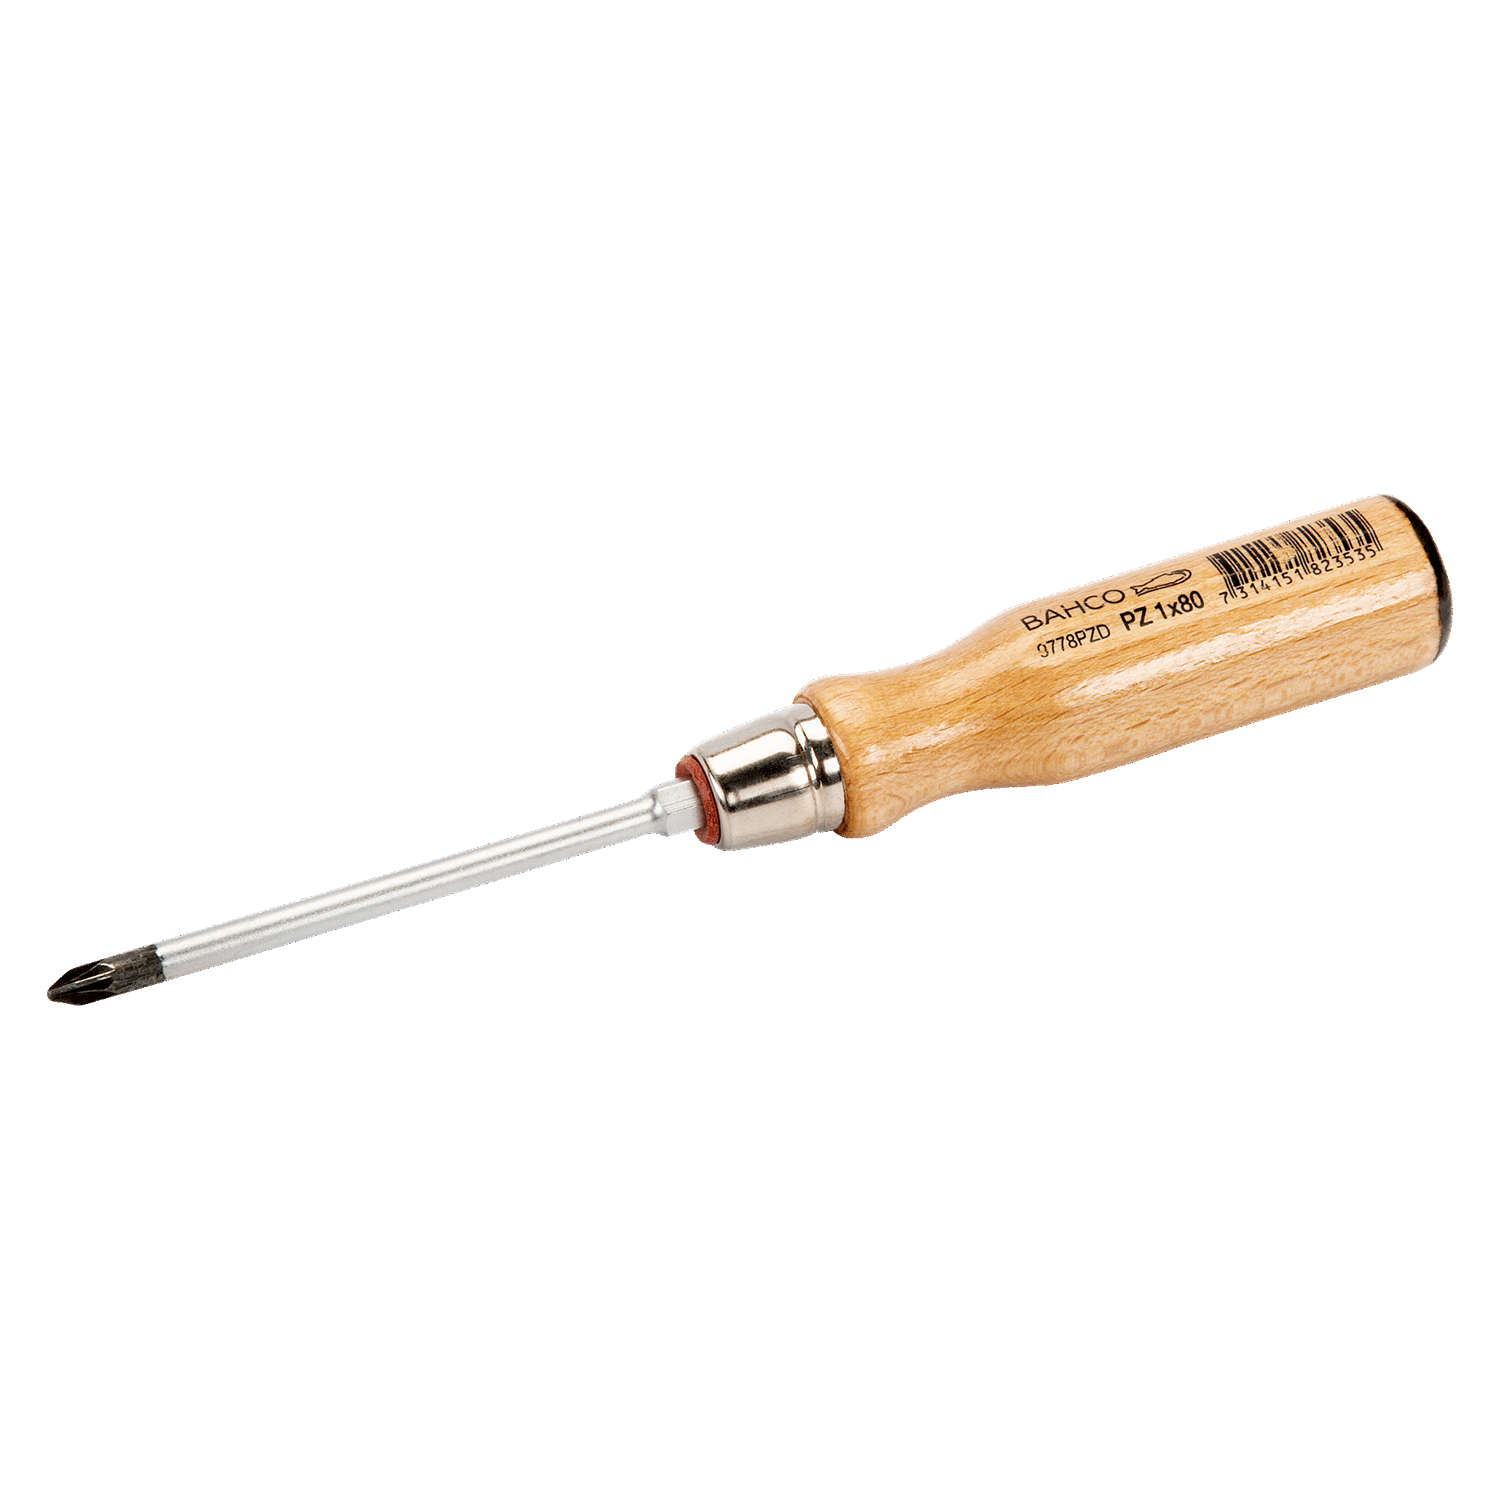 BAHCO 9778PZD Pozidriv Screwdriver with Wooden Handle PZ1-PZ2 - Premium Pozidriv Screwdriver from BAHCO - Shop now at Yew Aik.